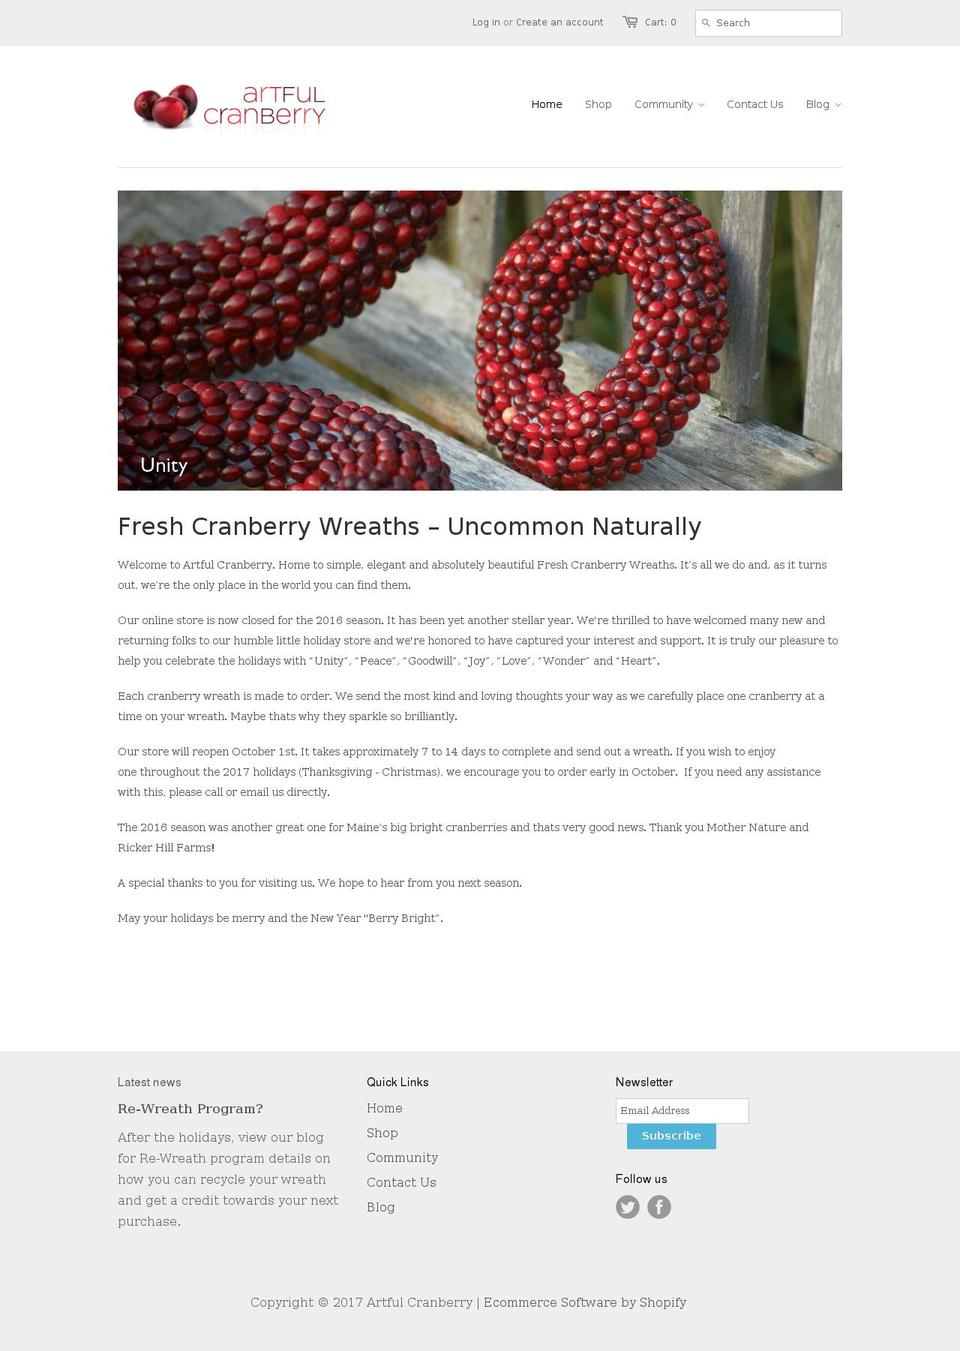 Copy of Minimal Shopify theme site example cranberrywreaths.com